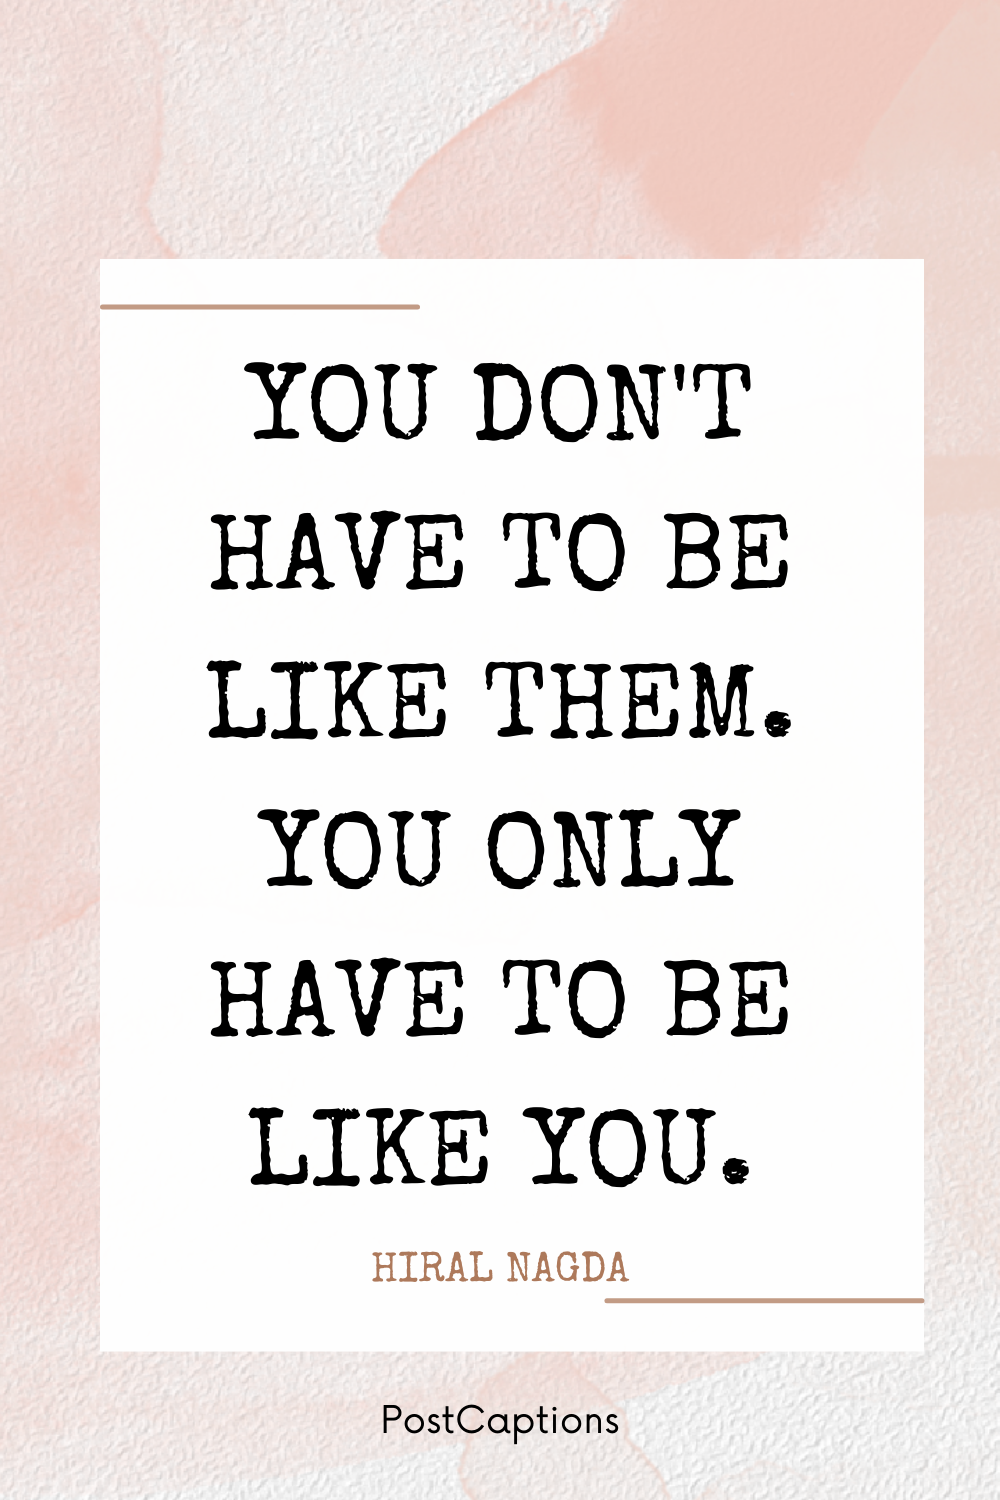 Be yourself quotes for IG